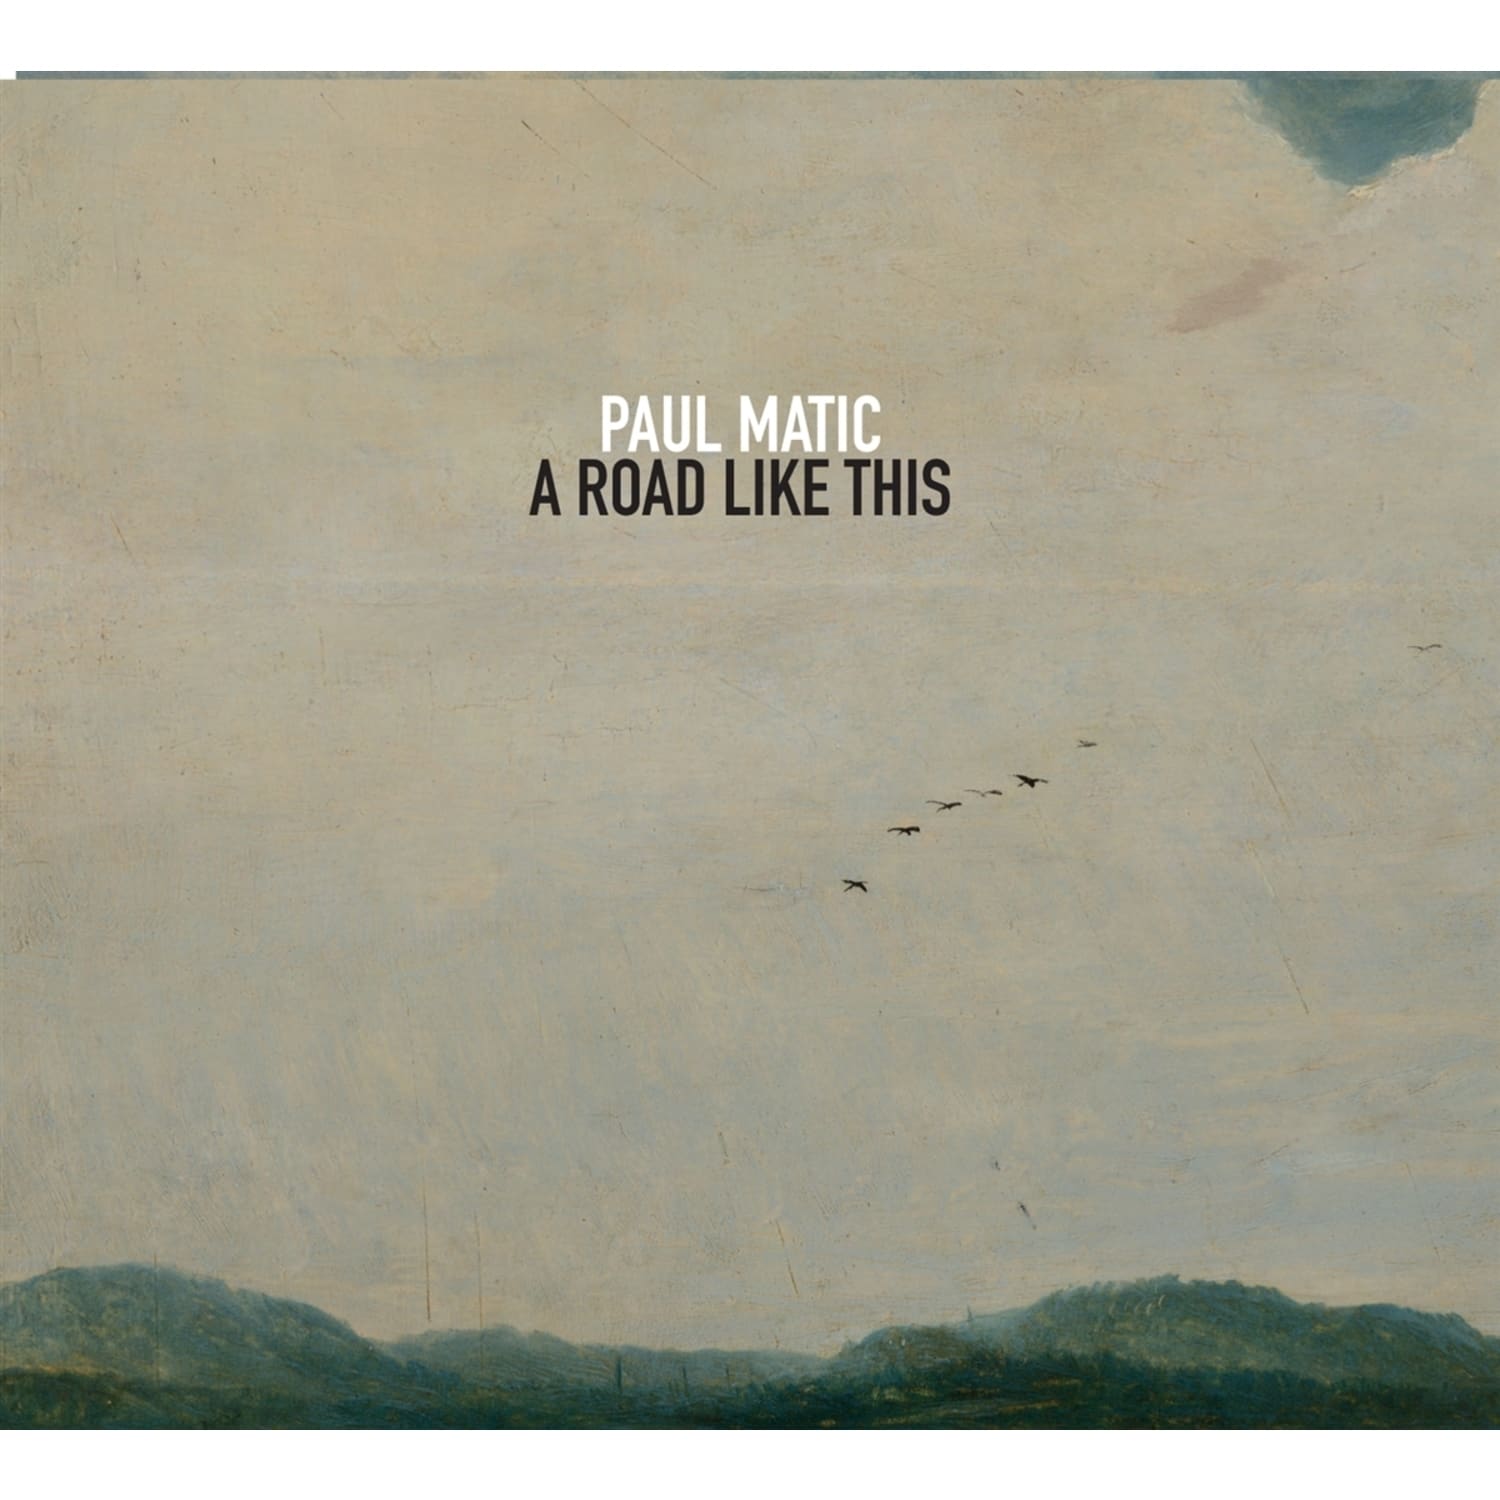  Paul Matic - A ROAD LIKE THIS 